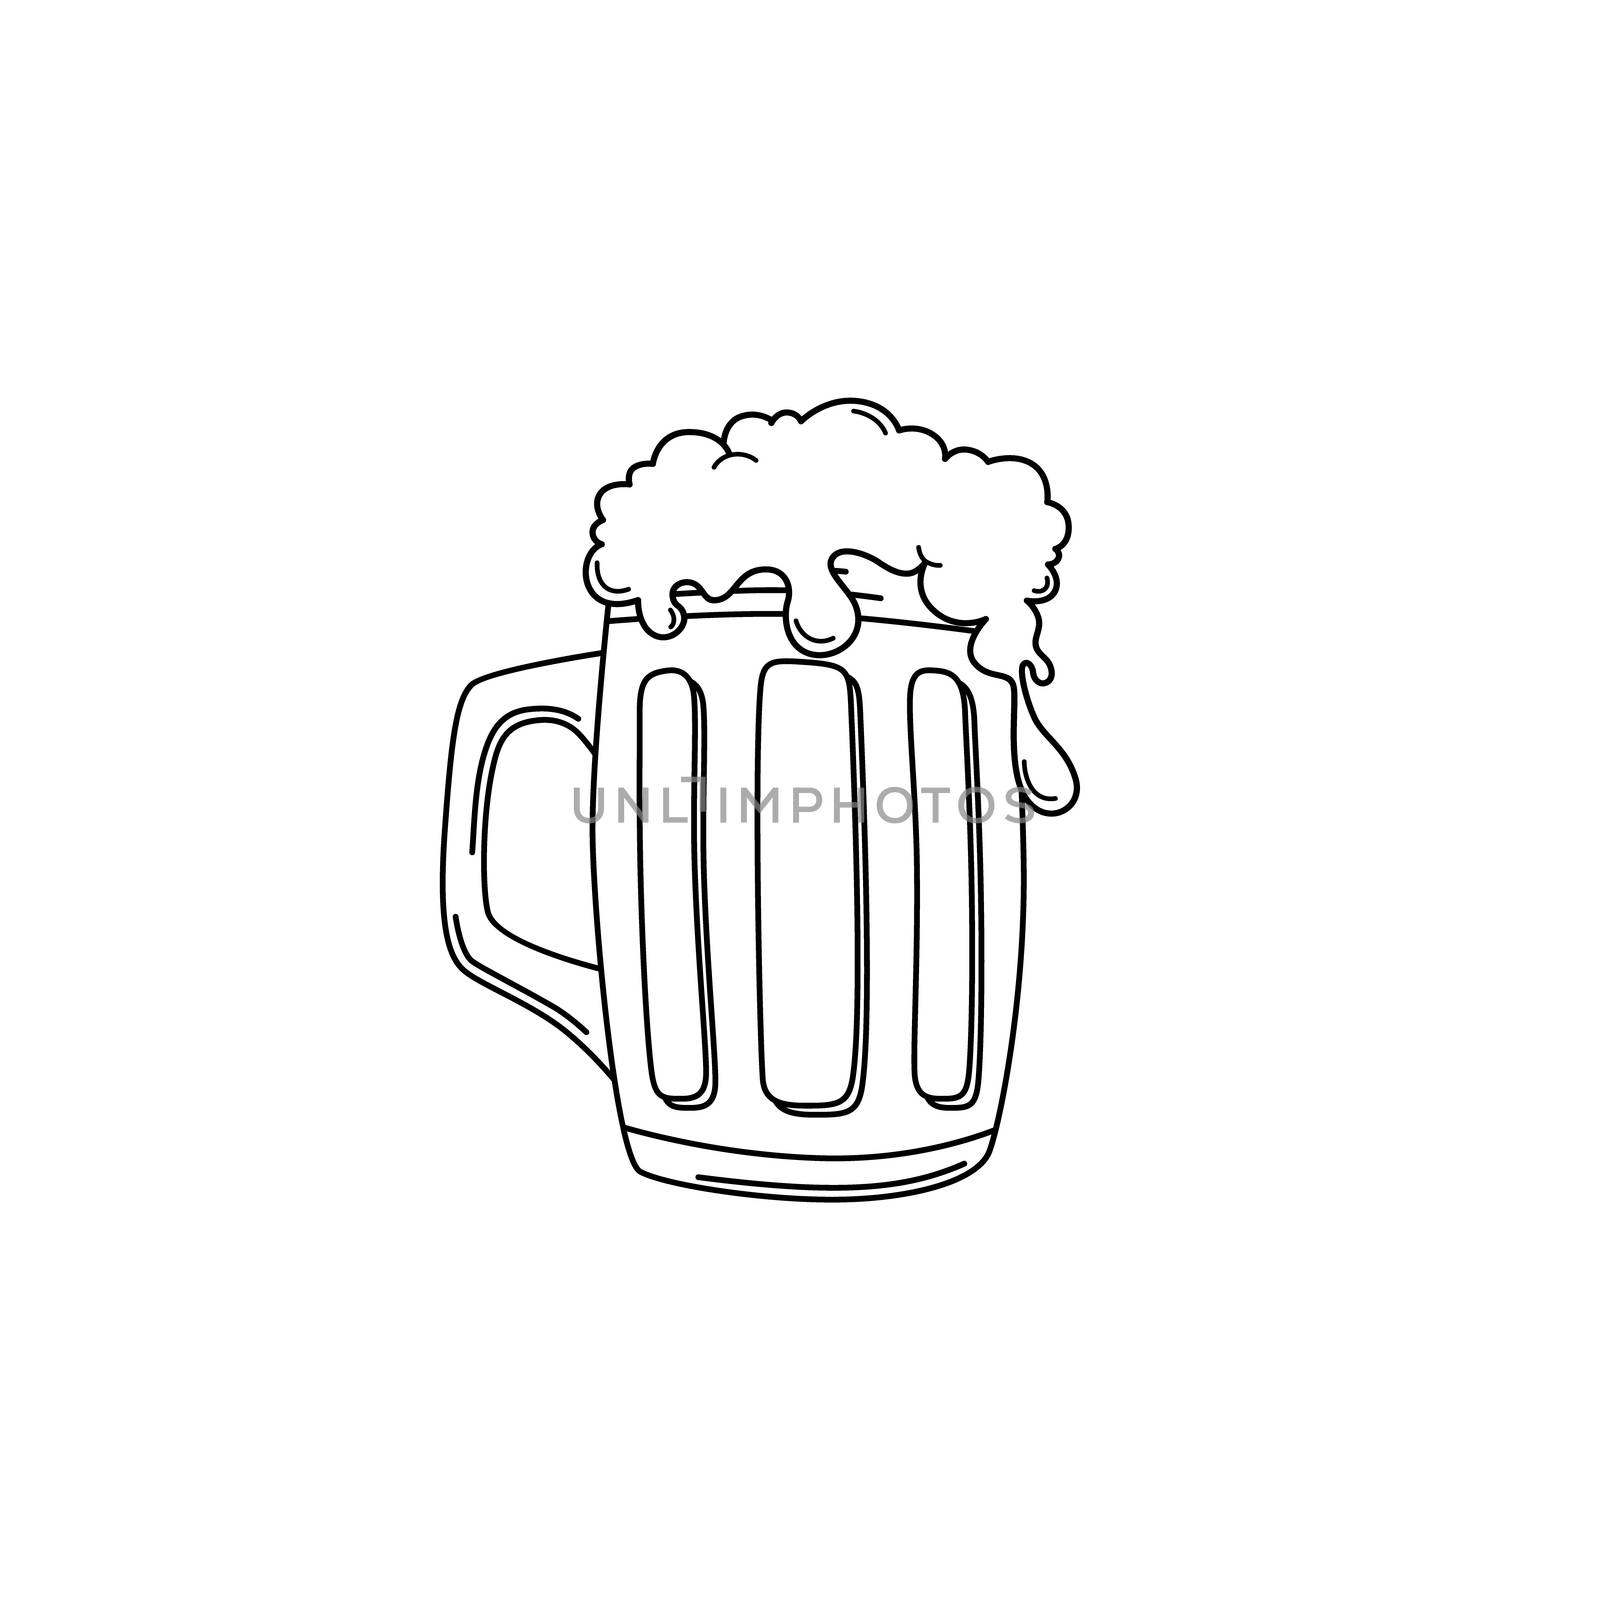 cold beer theme by vector1st